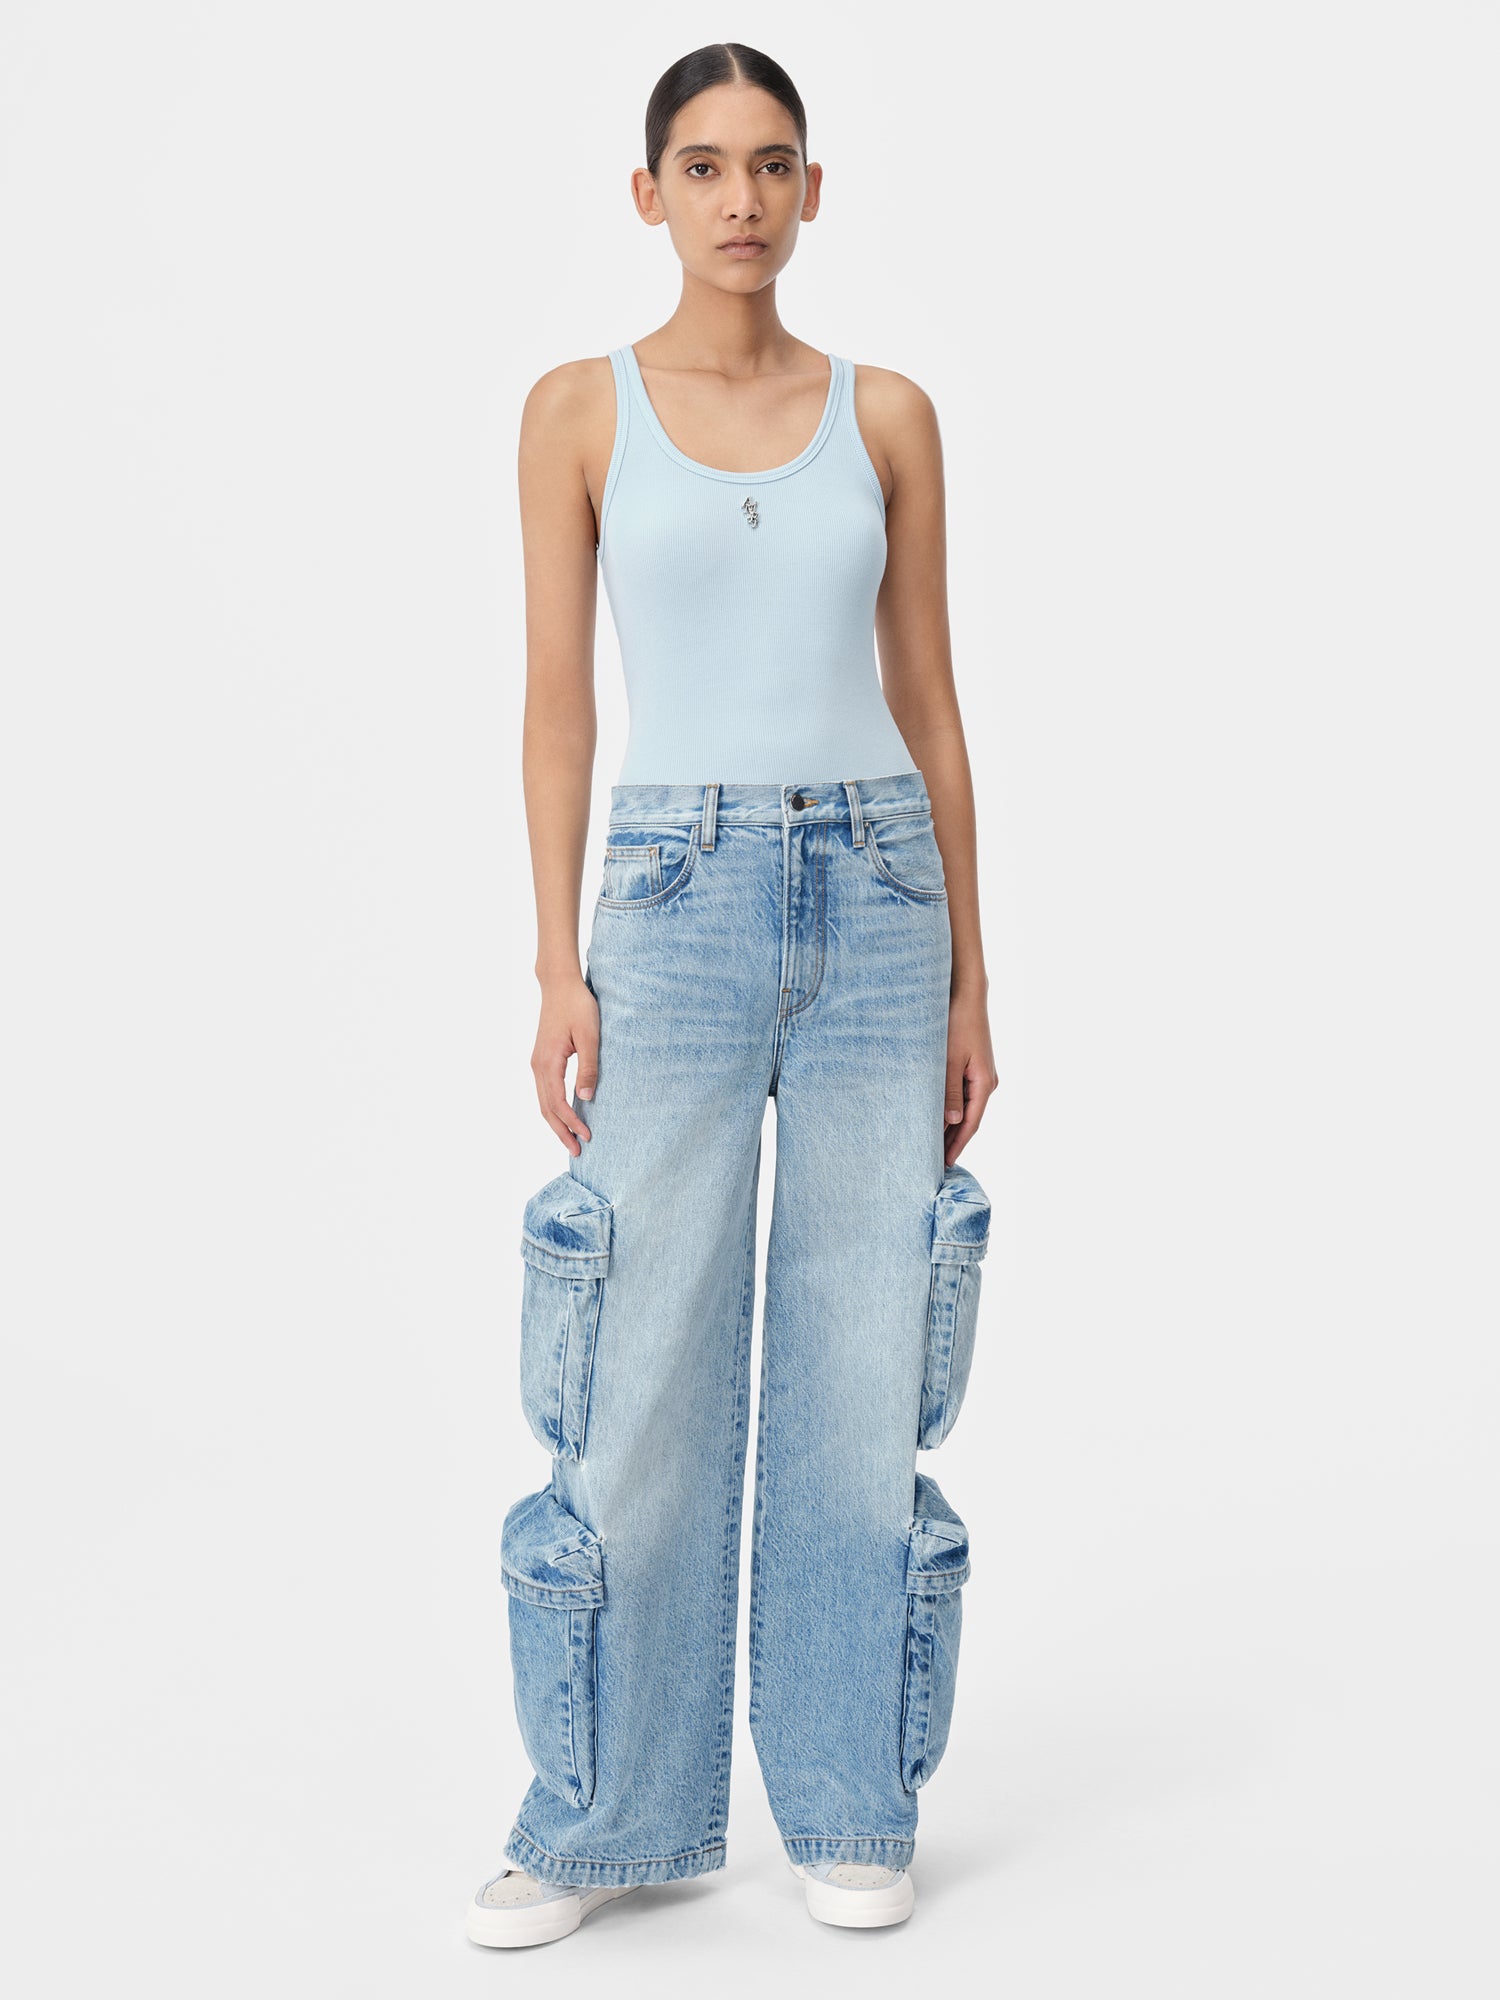 Product WOMEN - WOMEN'S AMIRI STACKED RIBBED TANK - Cerulean featured image